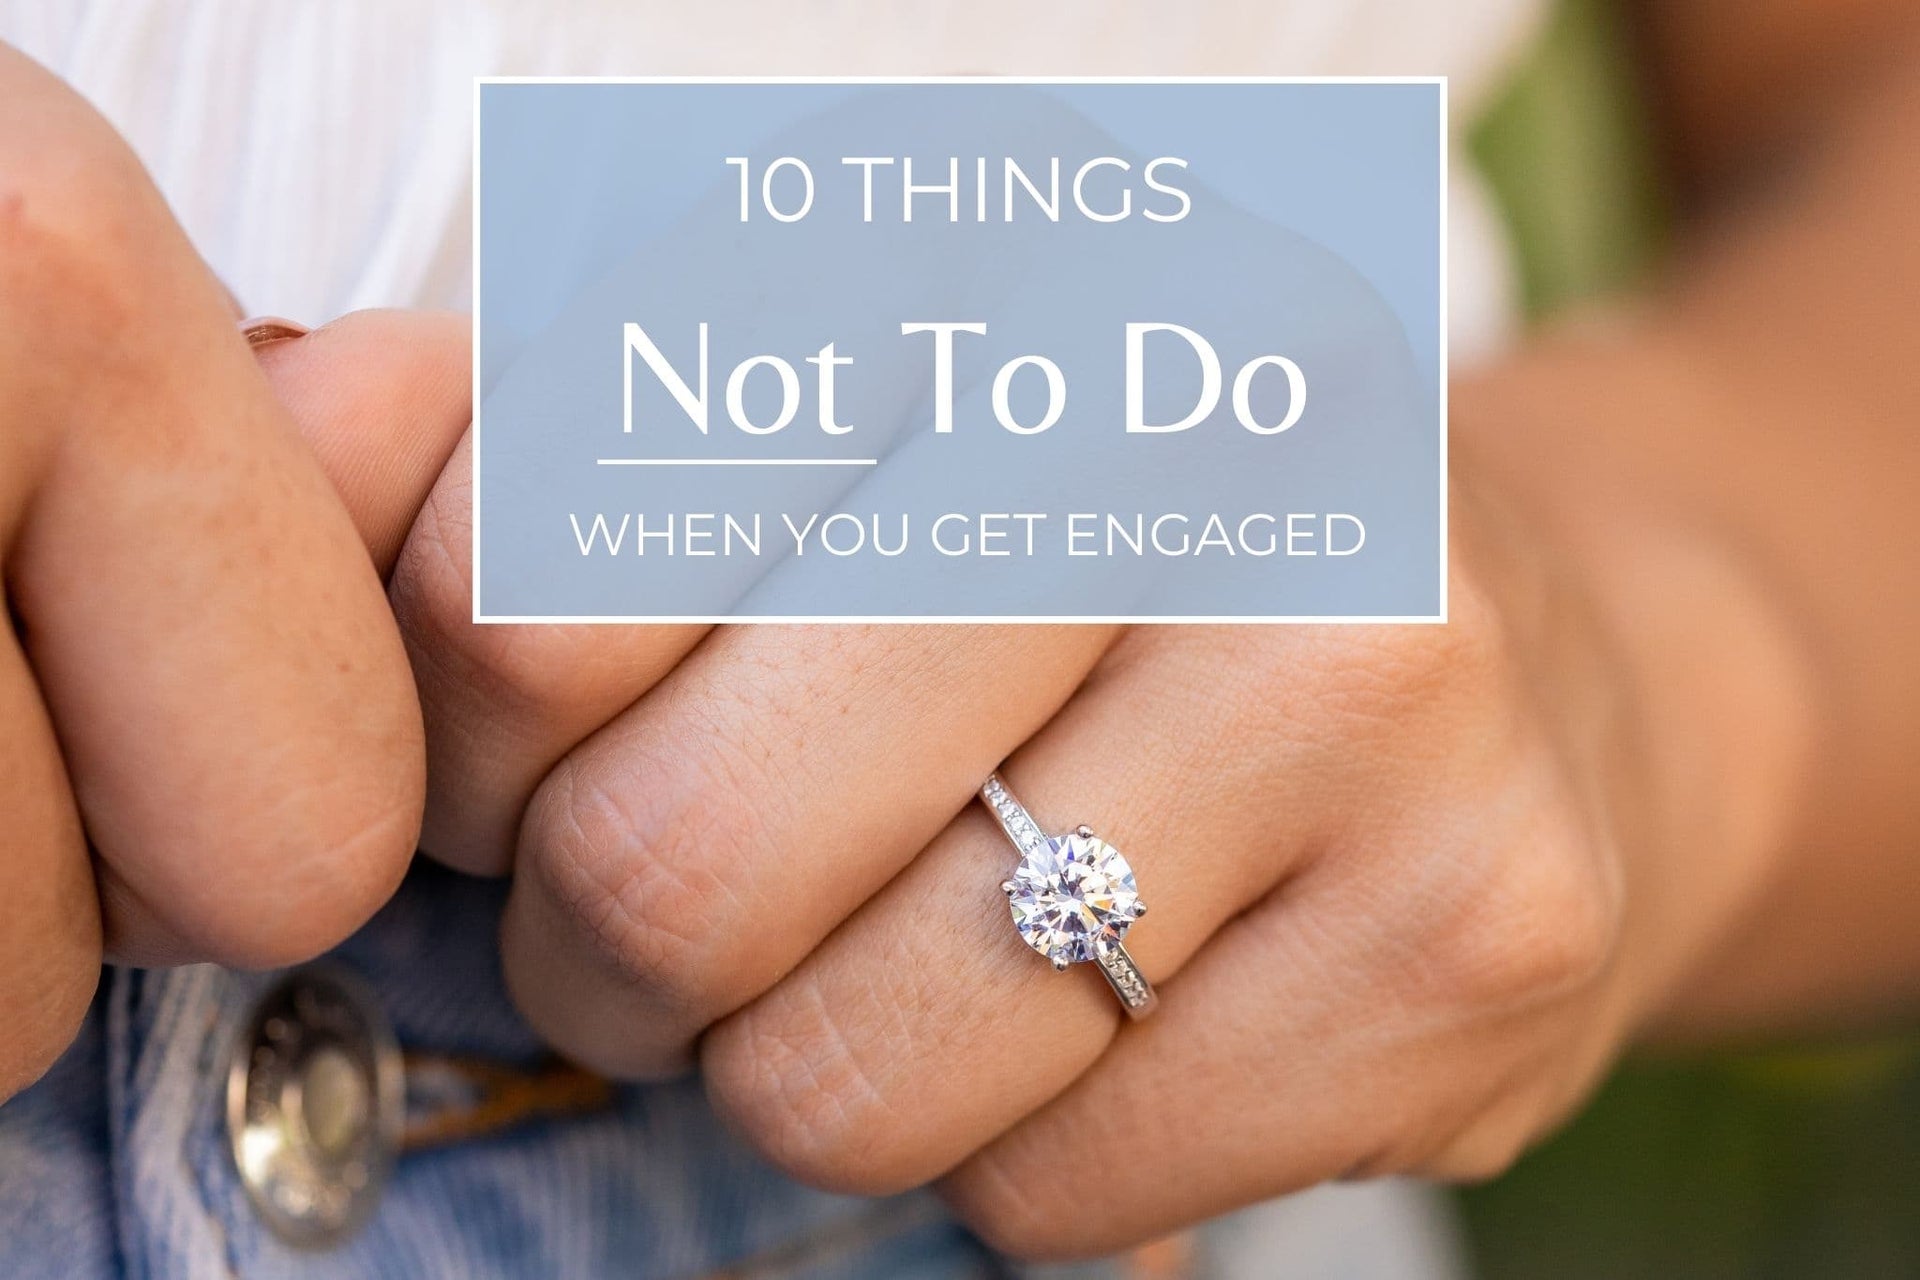 10 Things NOT to Do When You Get Engaged